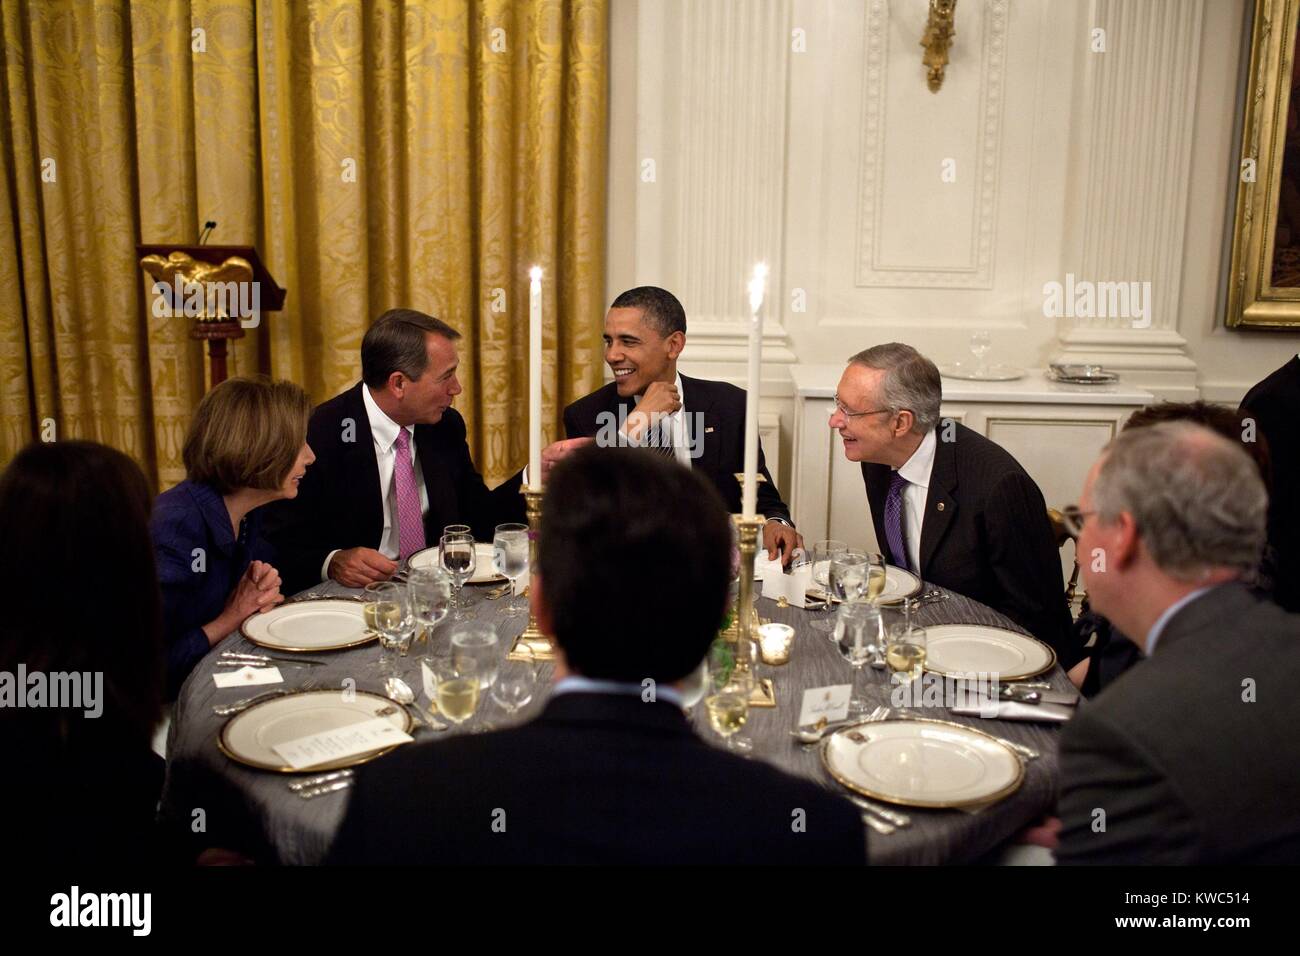 President Barack Obama's table at a dinner with chairmen and ranking members of Congress. L-R: With House Minority Leader Nancy Pelosi, House Speaker John Boehner, The President, Senate Majority Leader Harry Reid, Sen. Minority Leader, Mitch McConnell. East Room of the White House, May 2, 2011. (BSLOC 2015 13 218) Stock Photo